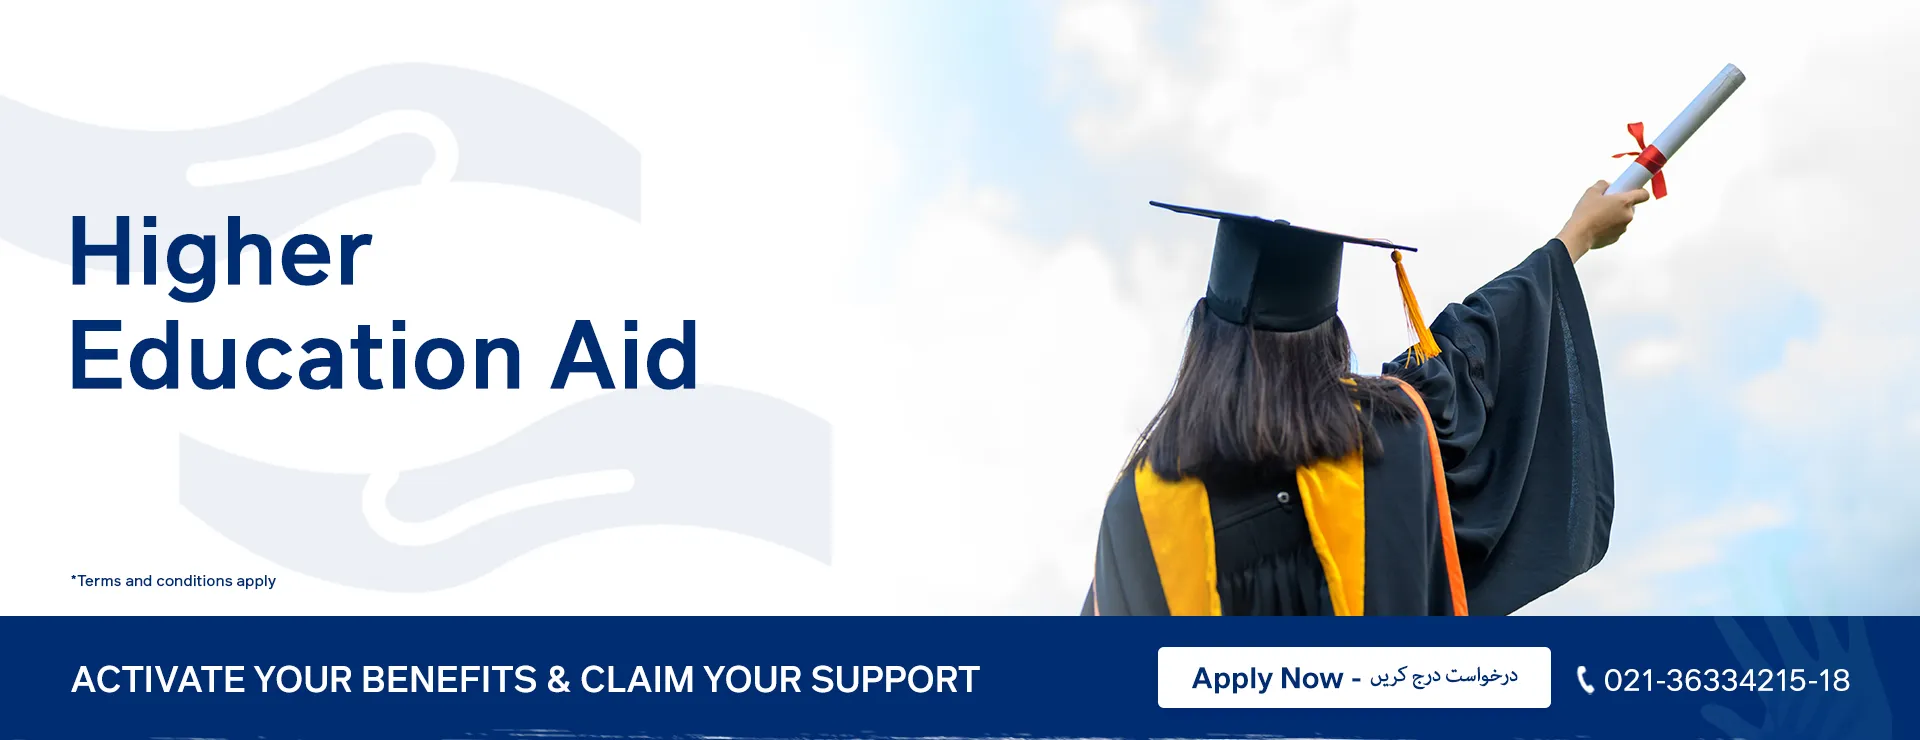 Higher-Education-Aid-new-one